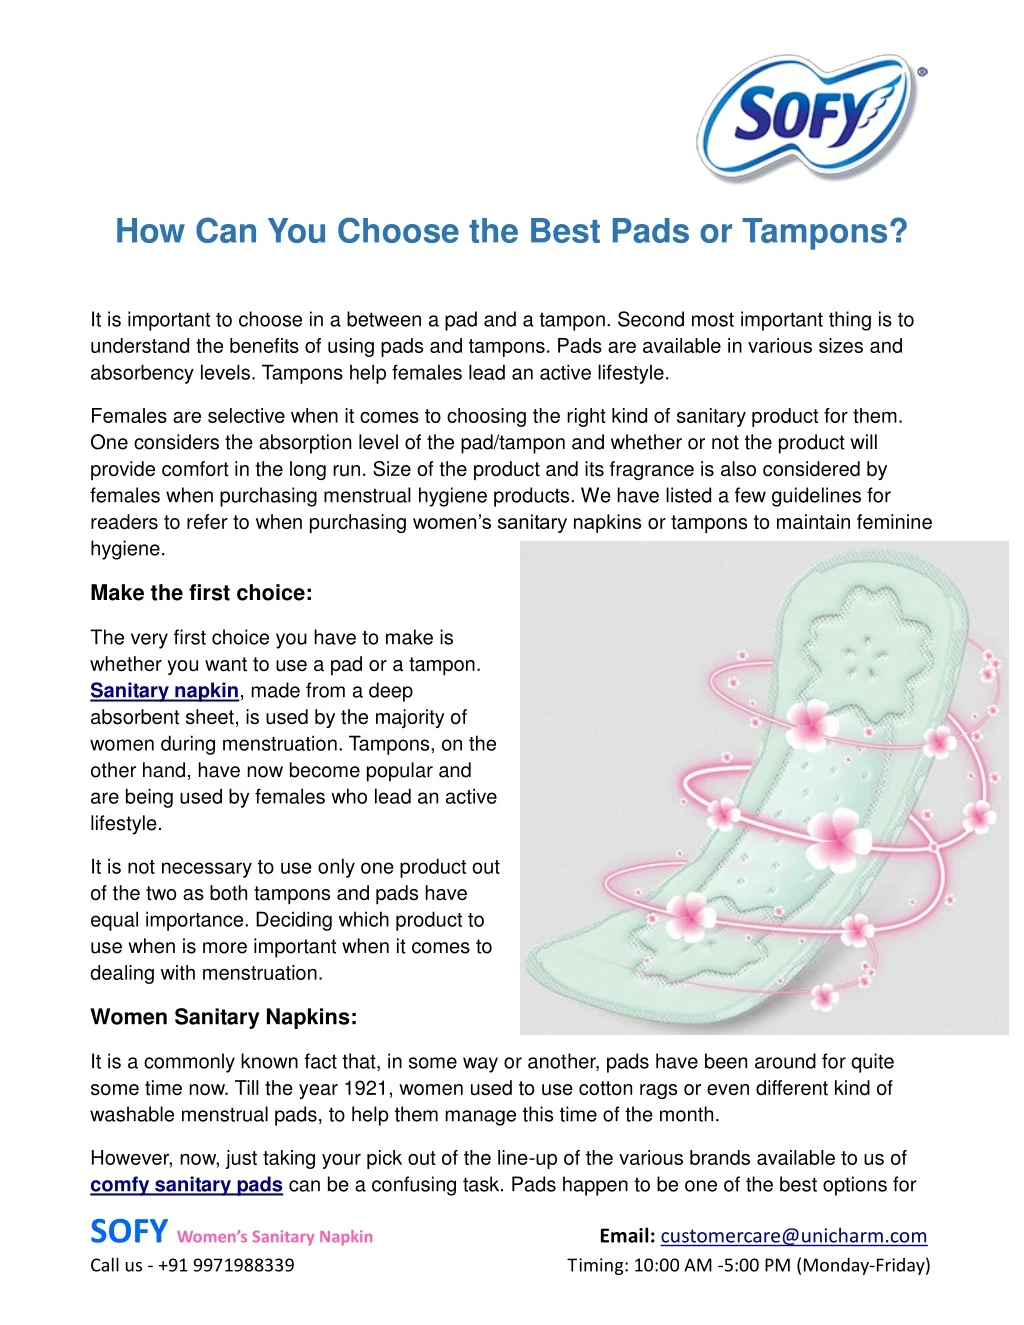 how can you choose the best pads or tampons